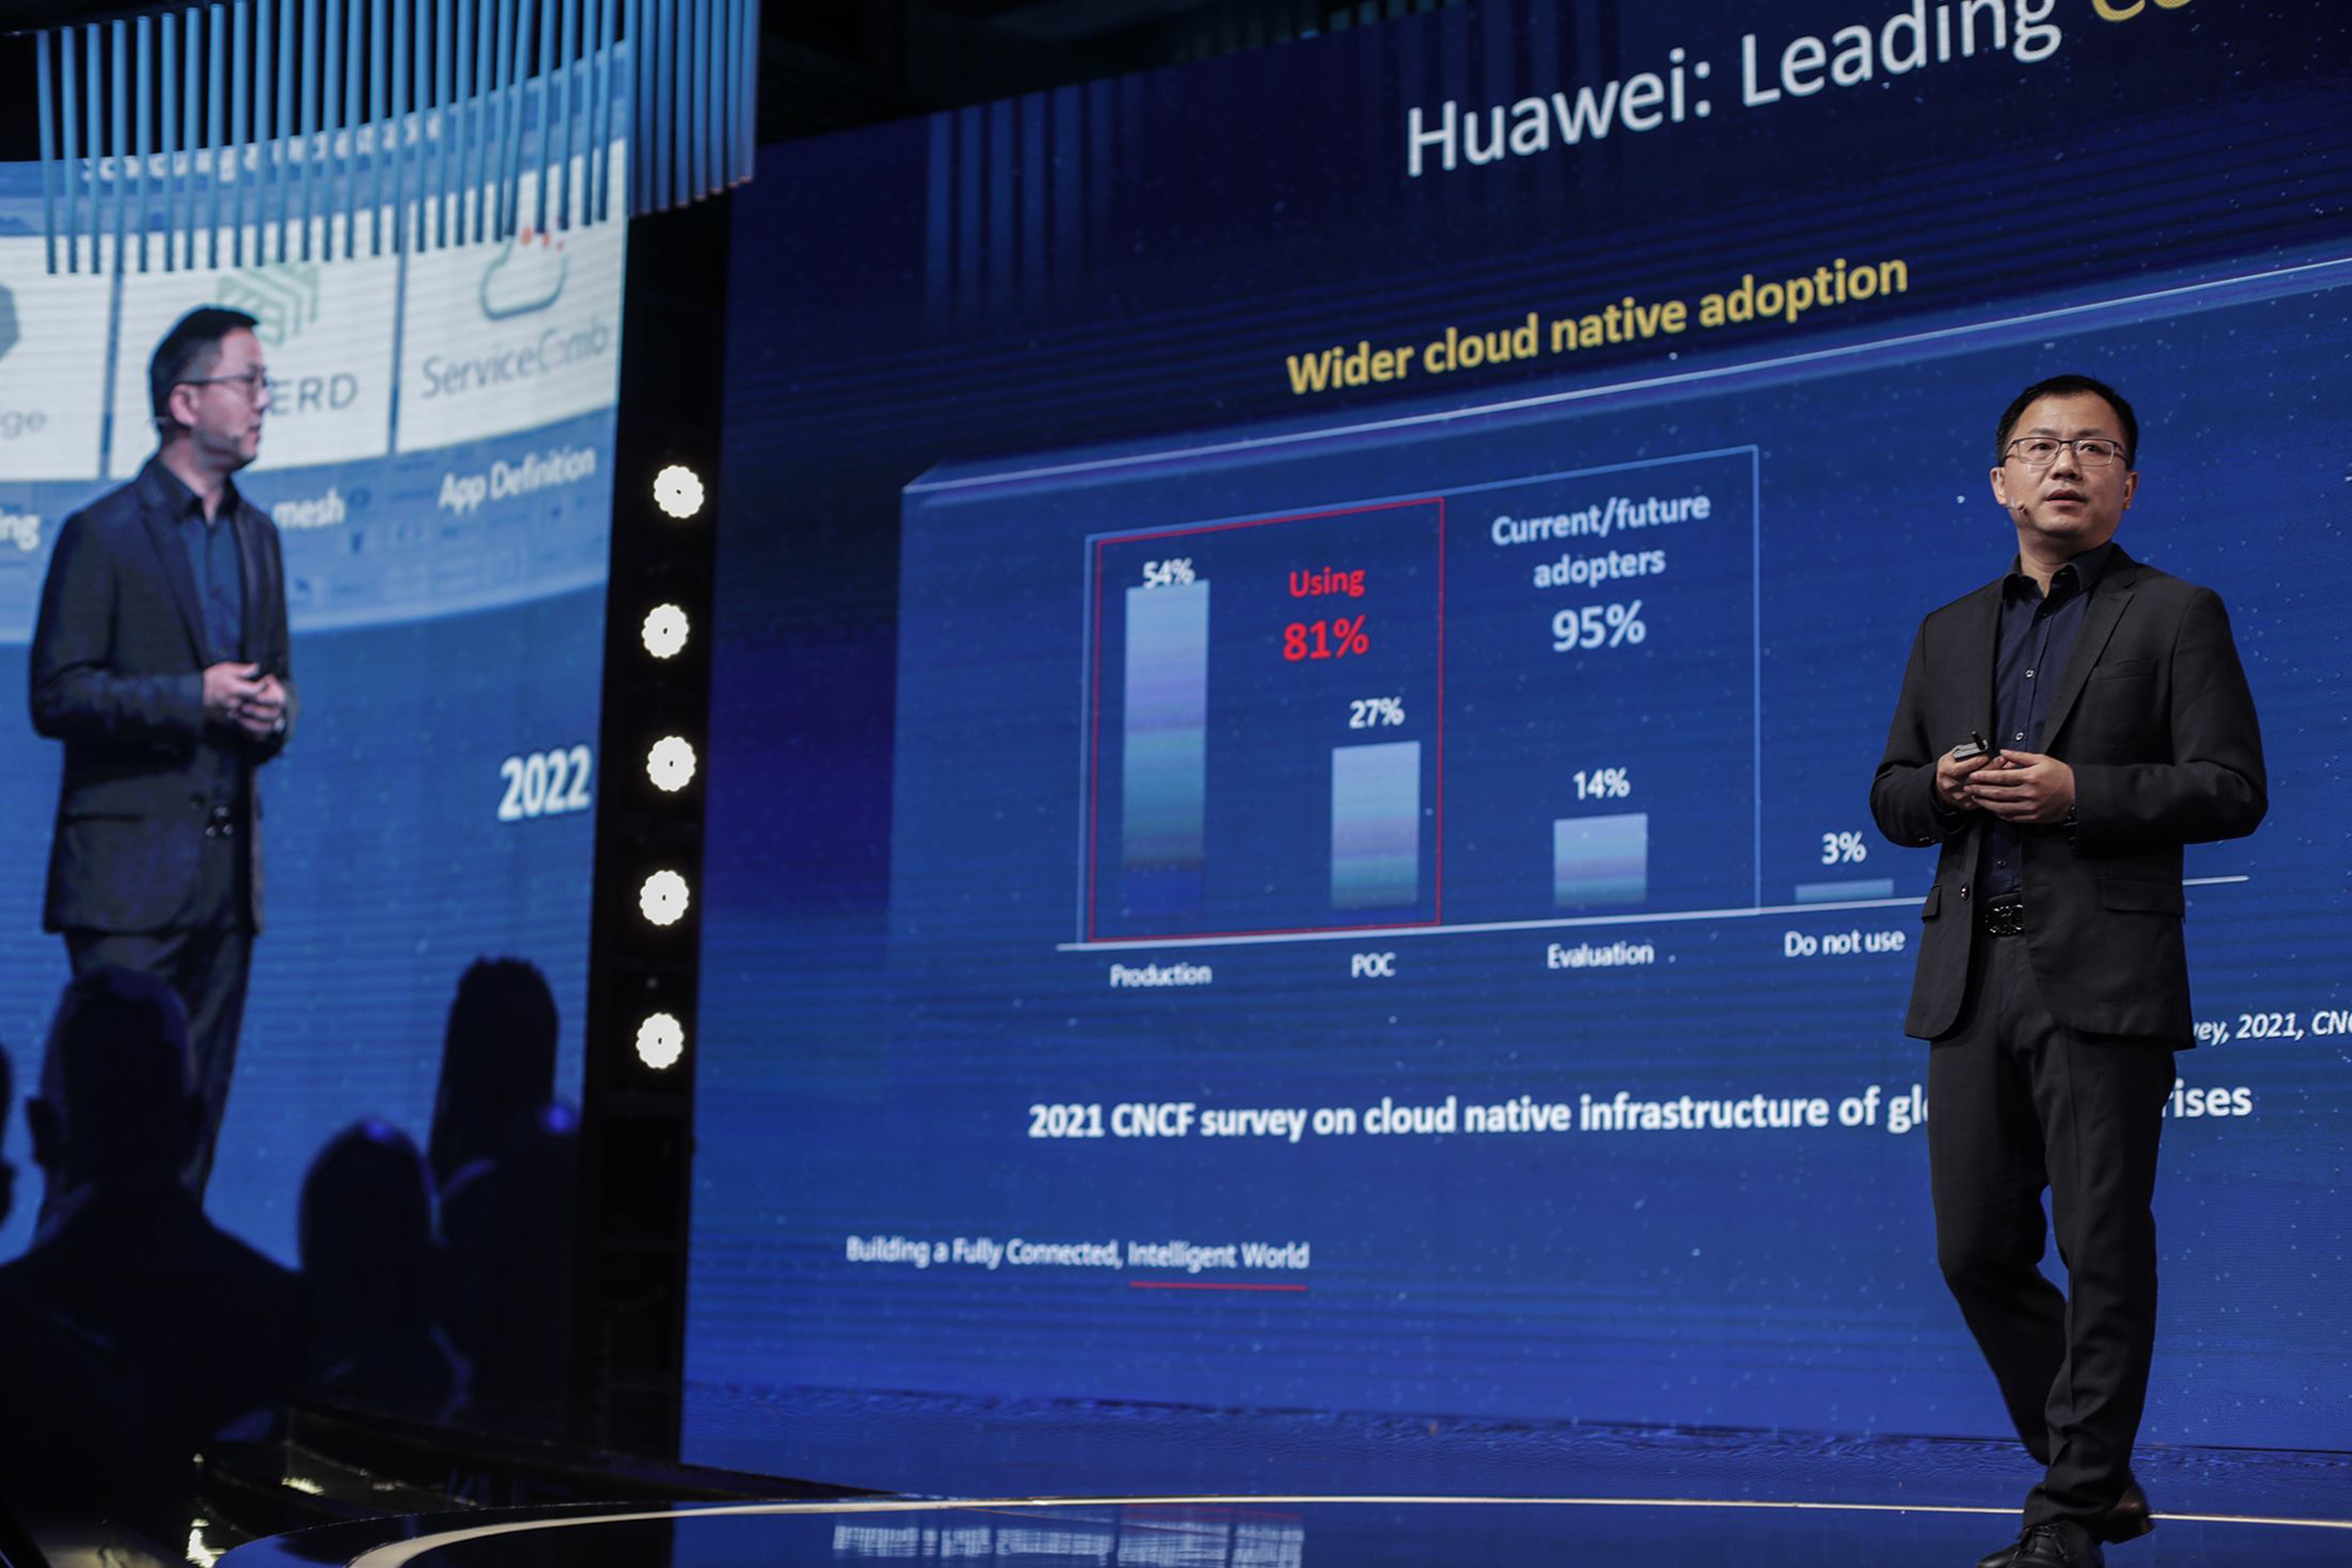 The President of Huawei Latin Cloud America, Fernando Liu, participates in the Huawei Cloud Latam Summit 2022 event in Rio de Janeiro, Brazil, on Sept. 21, 2022. The Chinese technology company Huawei announced the expansion and improvement of its cloud segment in Latin America with the aim of promoting the digital transformation and development of the region.